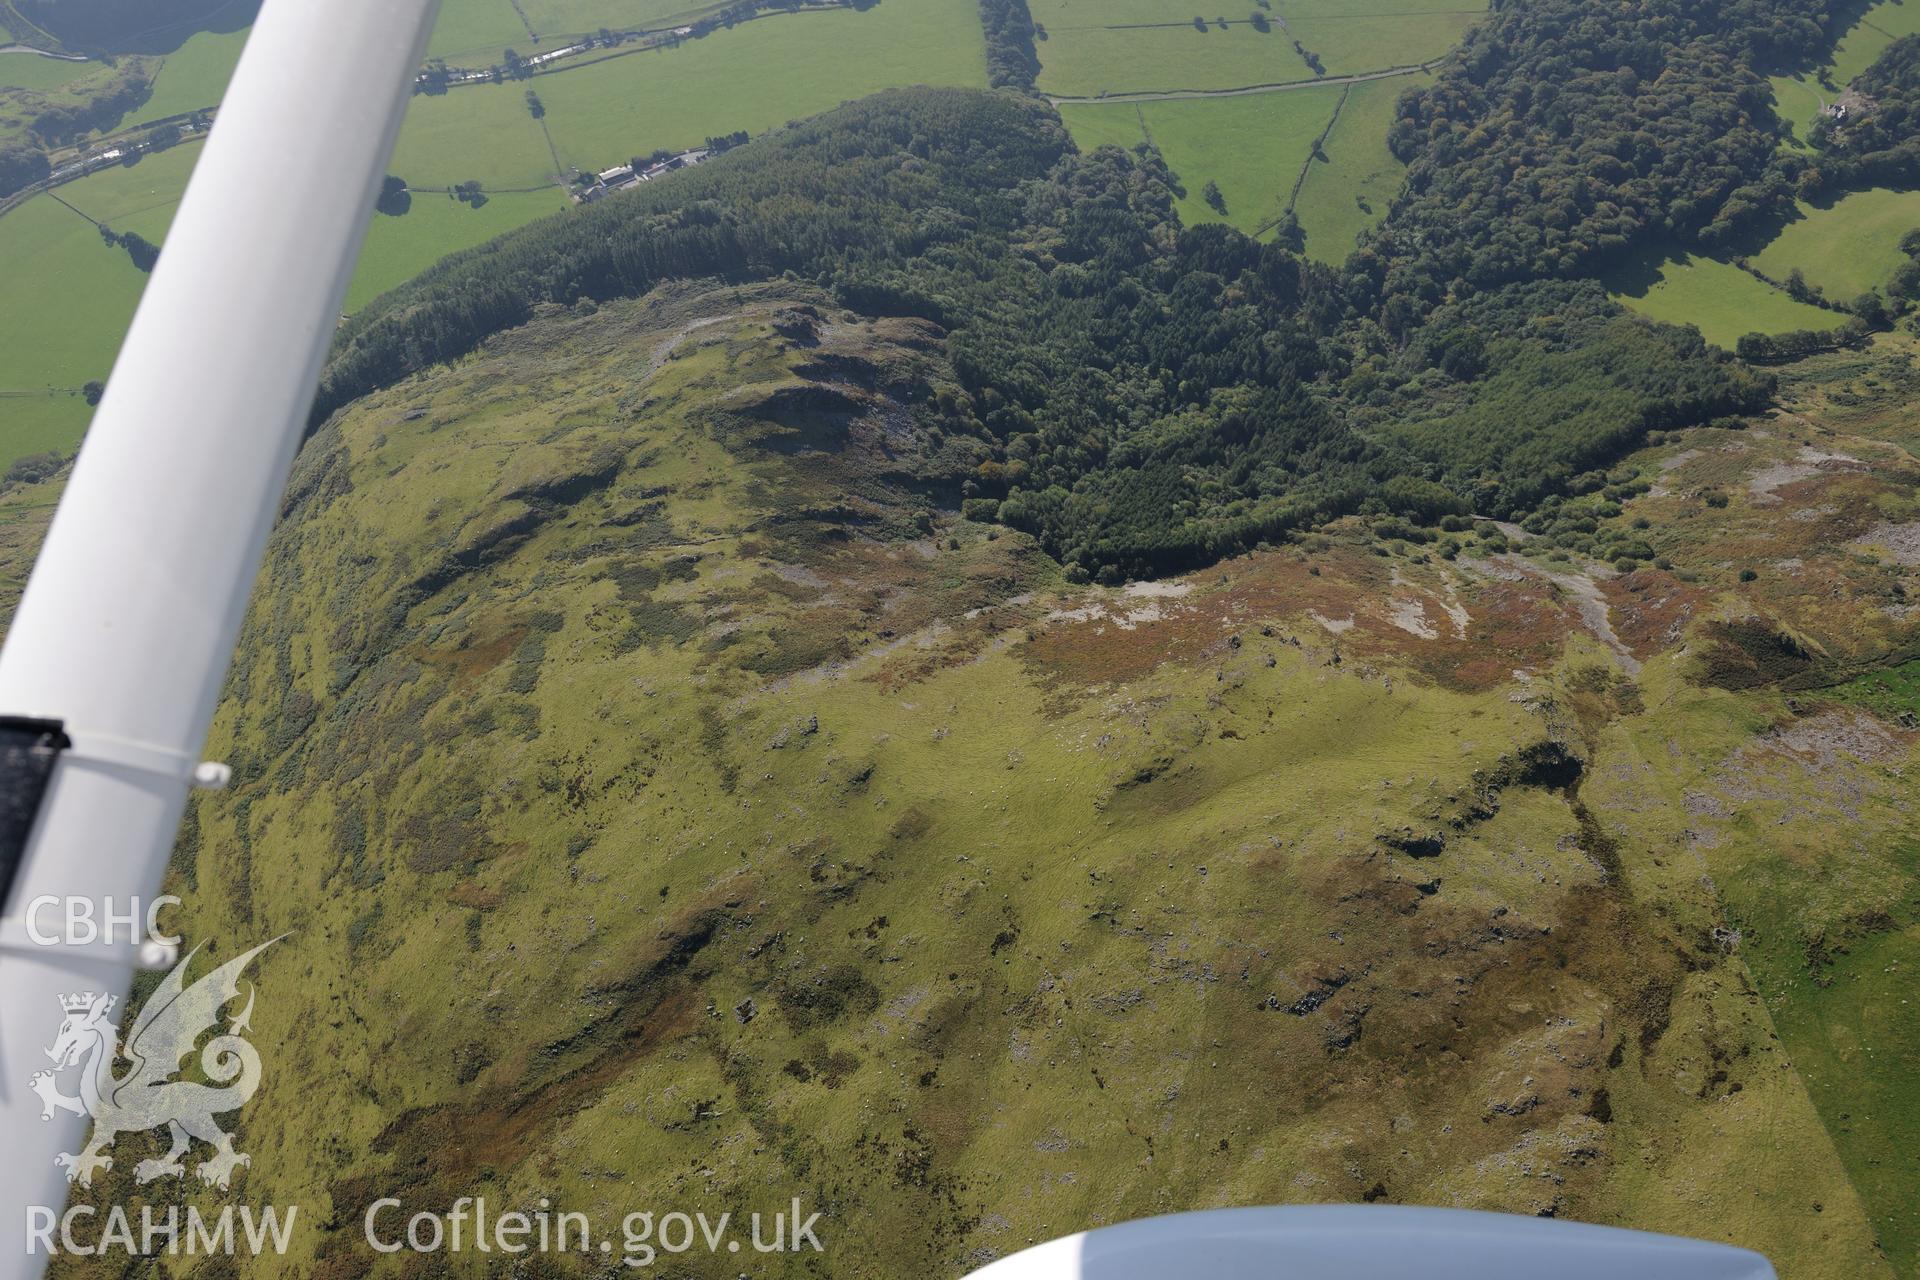 Settlement at Craig Tyn-y-Cornel, on the Esgair Berfa part of the Cadair Idris range. Oblique aerial photograph taken during the Royal Commission's programme of archaeological aerial reconnaissance by Toby Driver on 2nd October 2015.